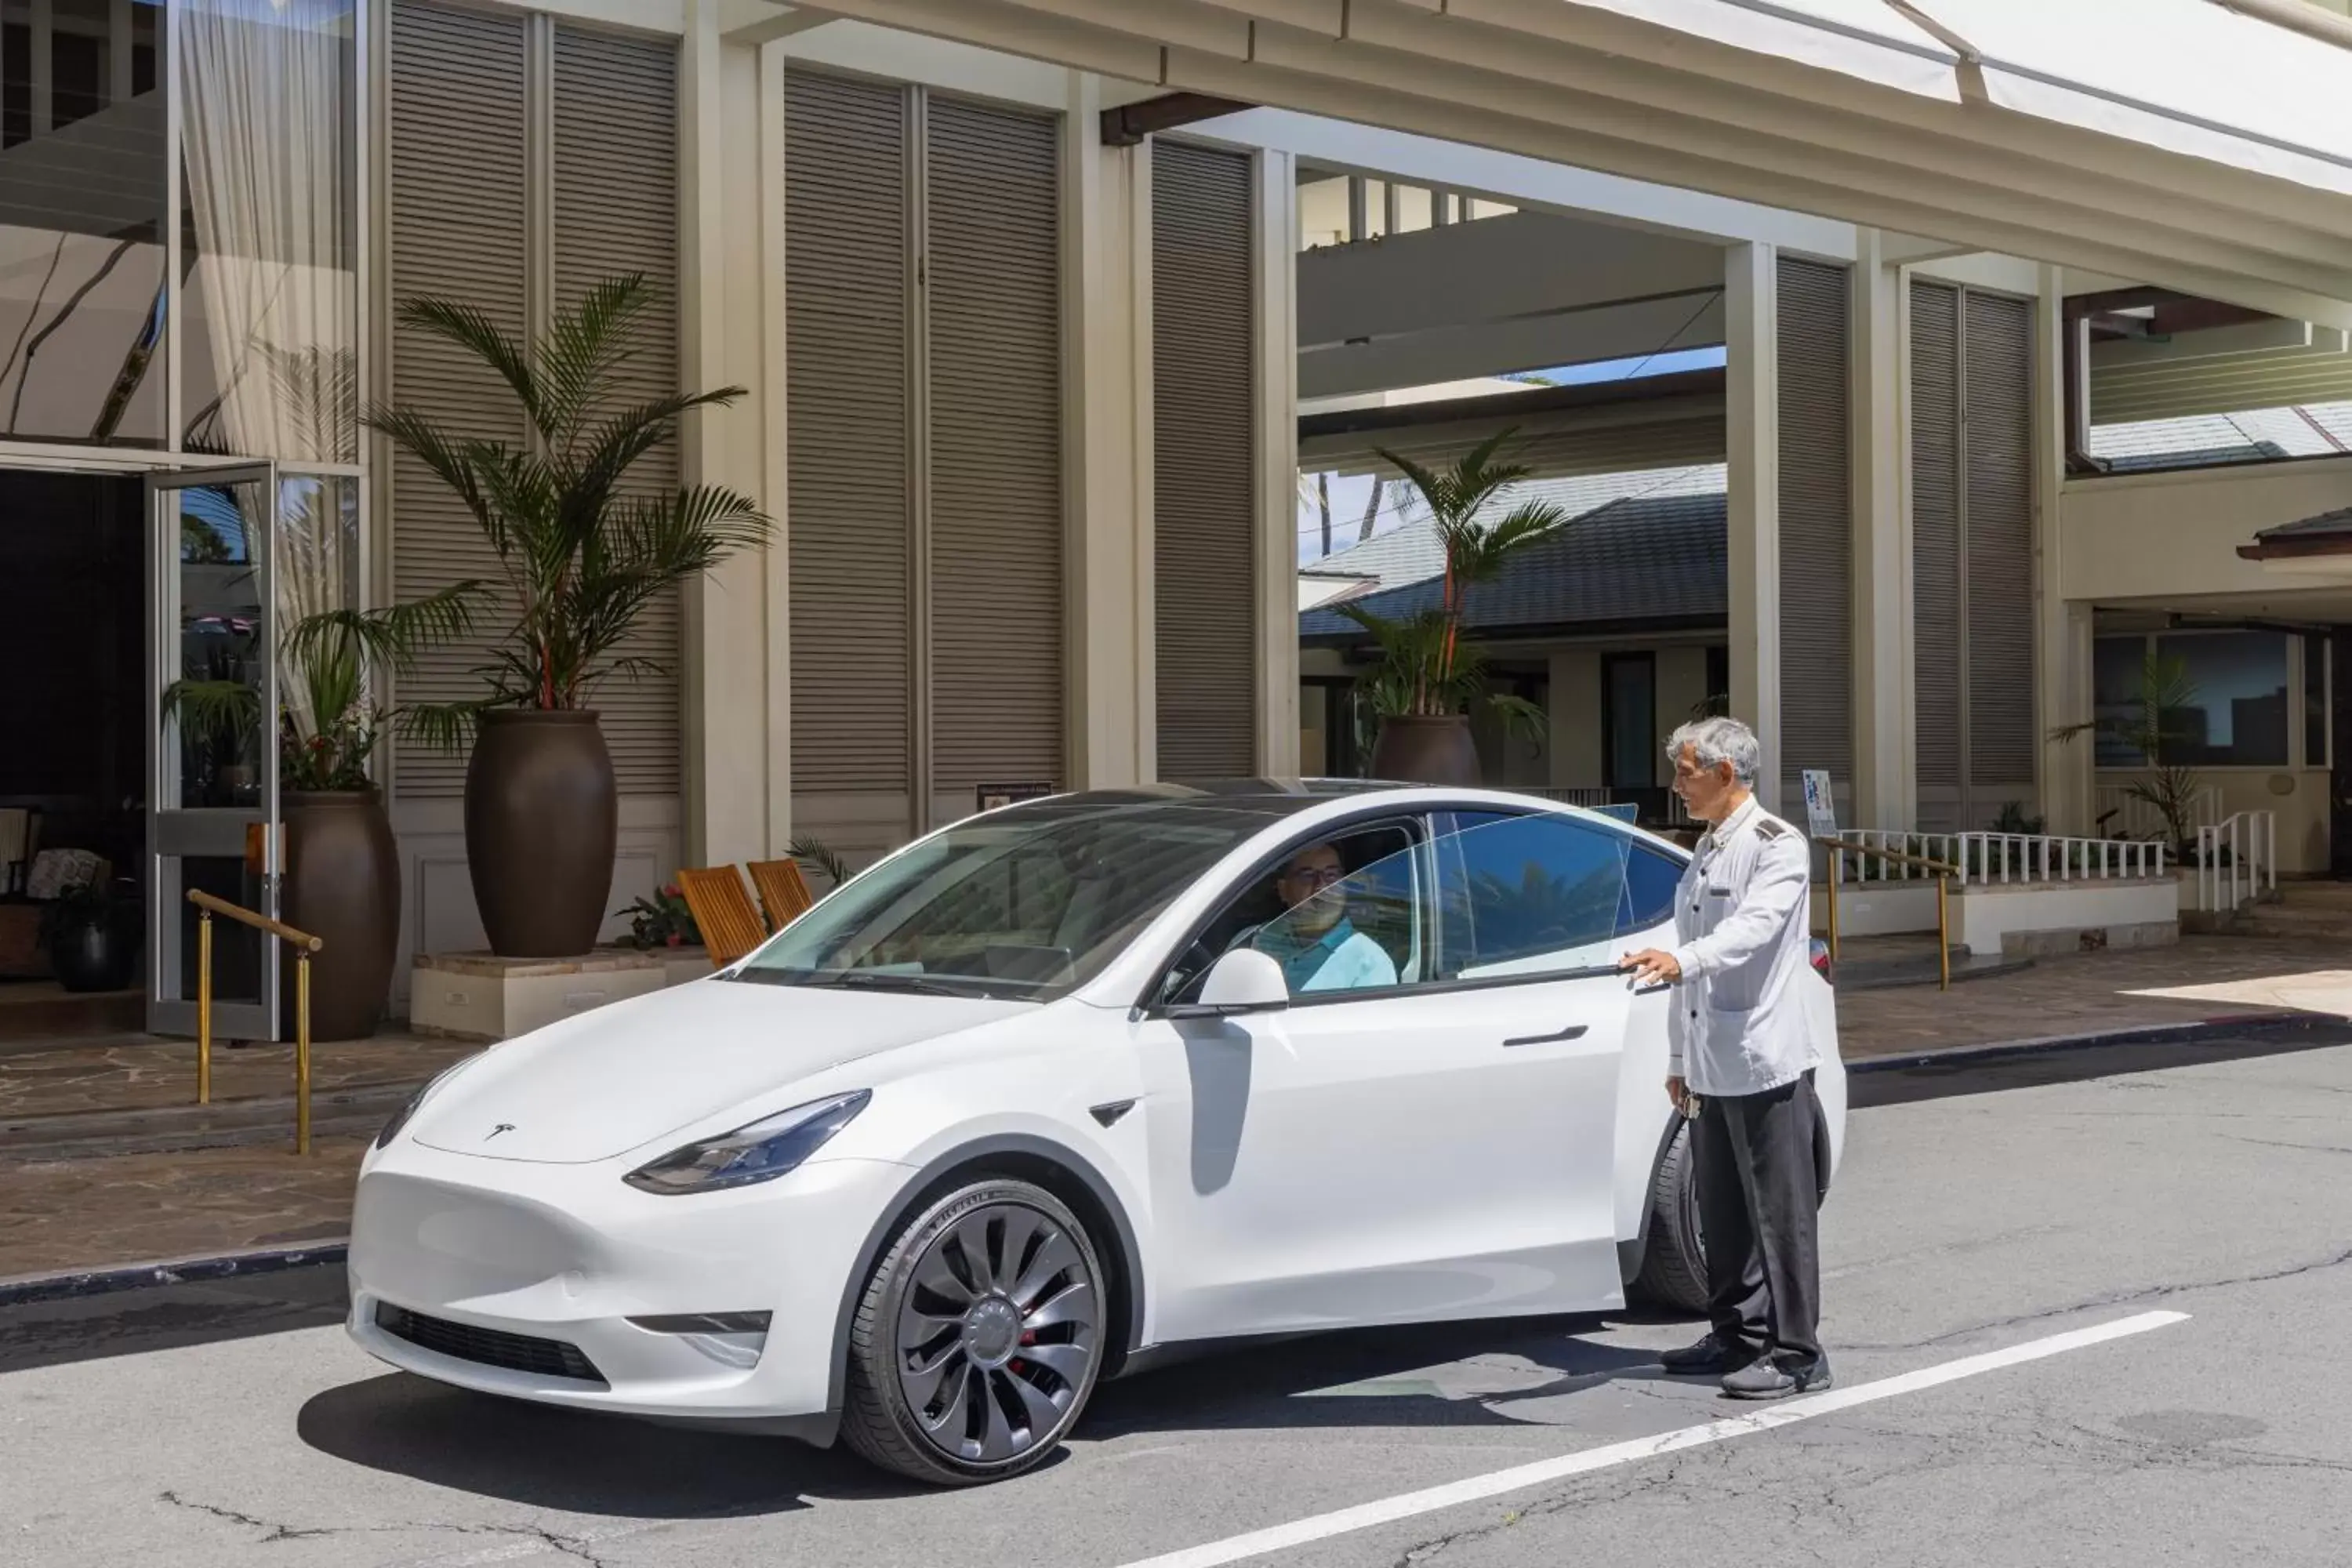 Parking in The Kahala Hotel and Resort